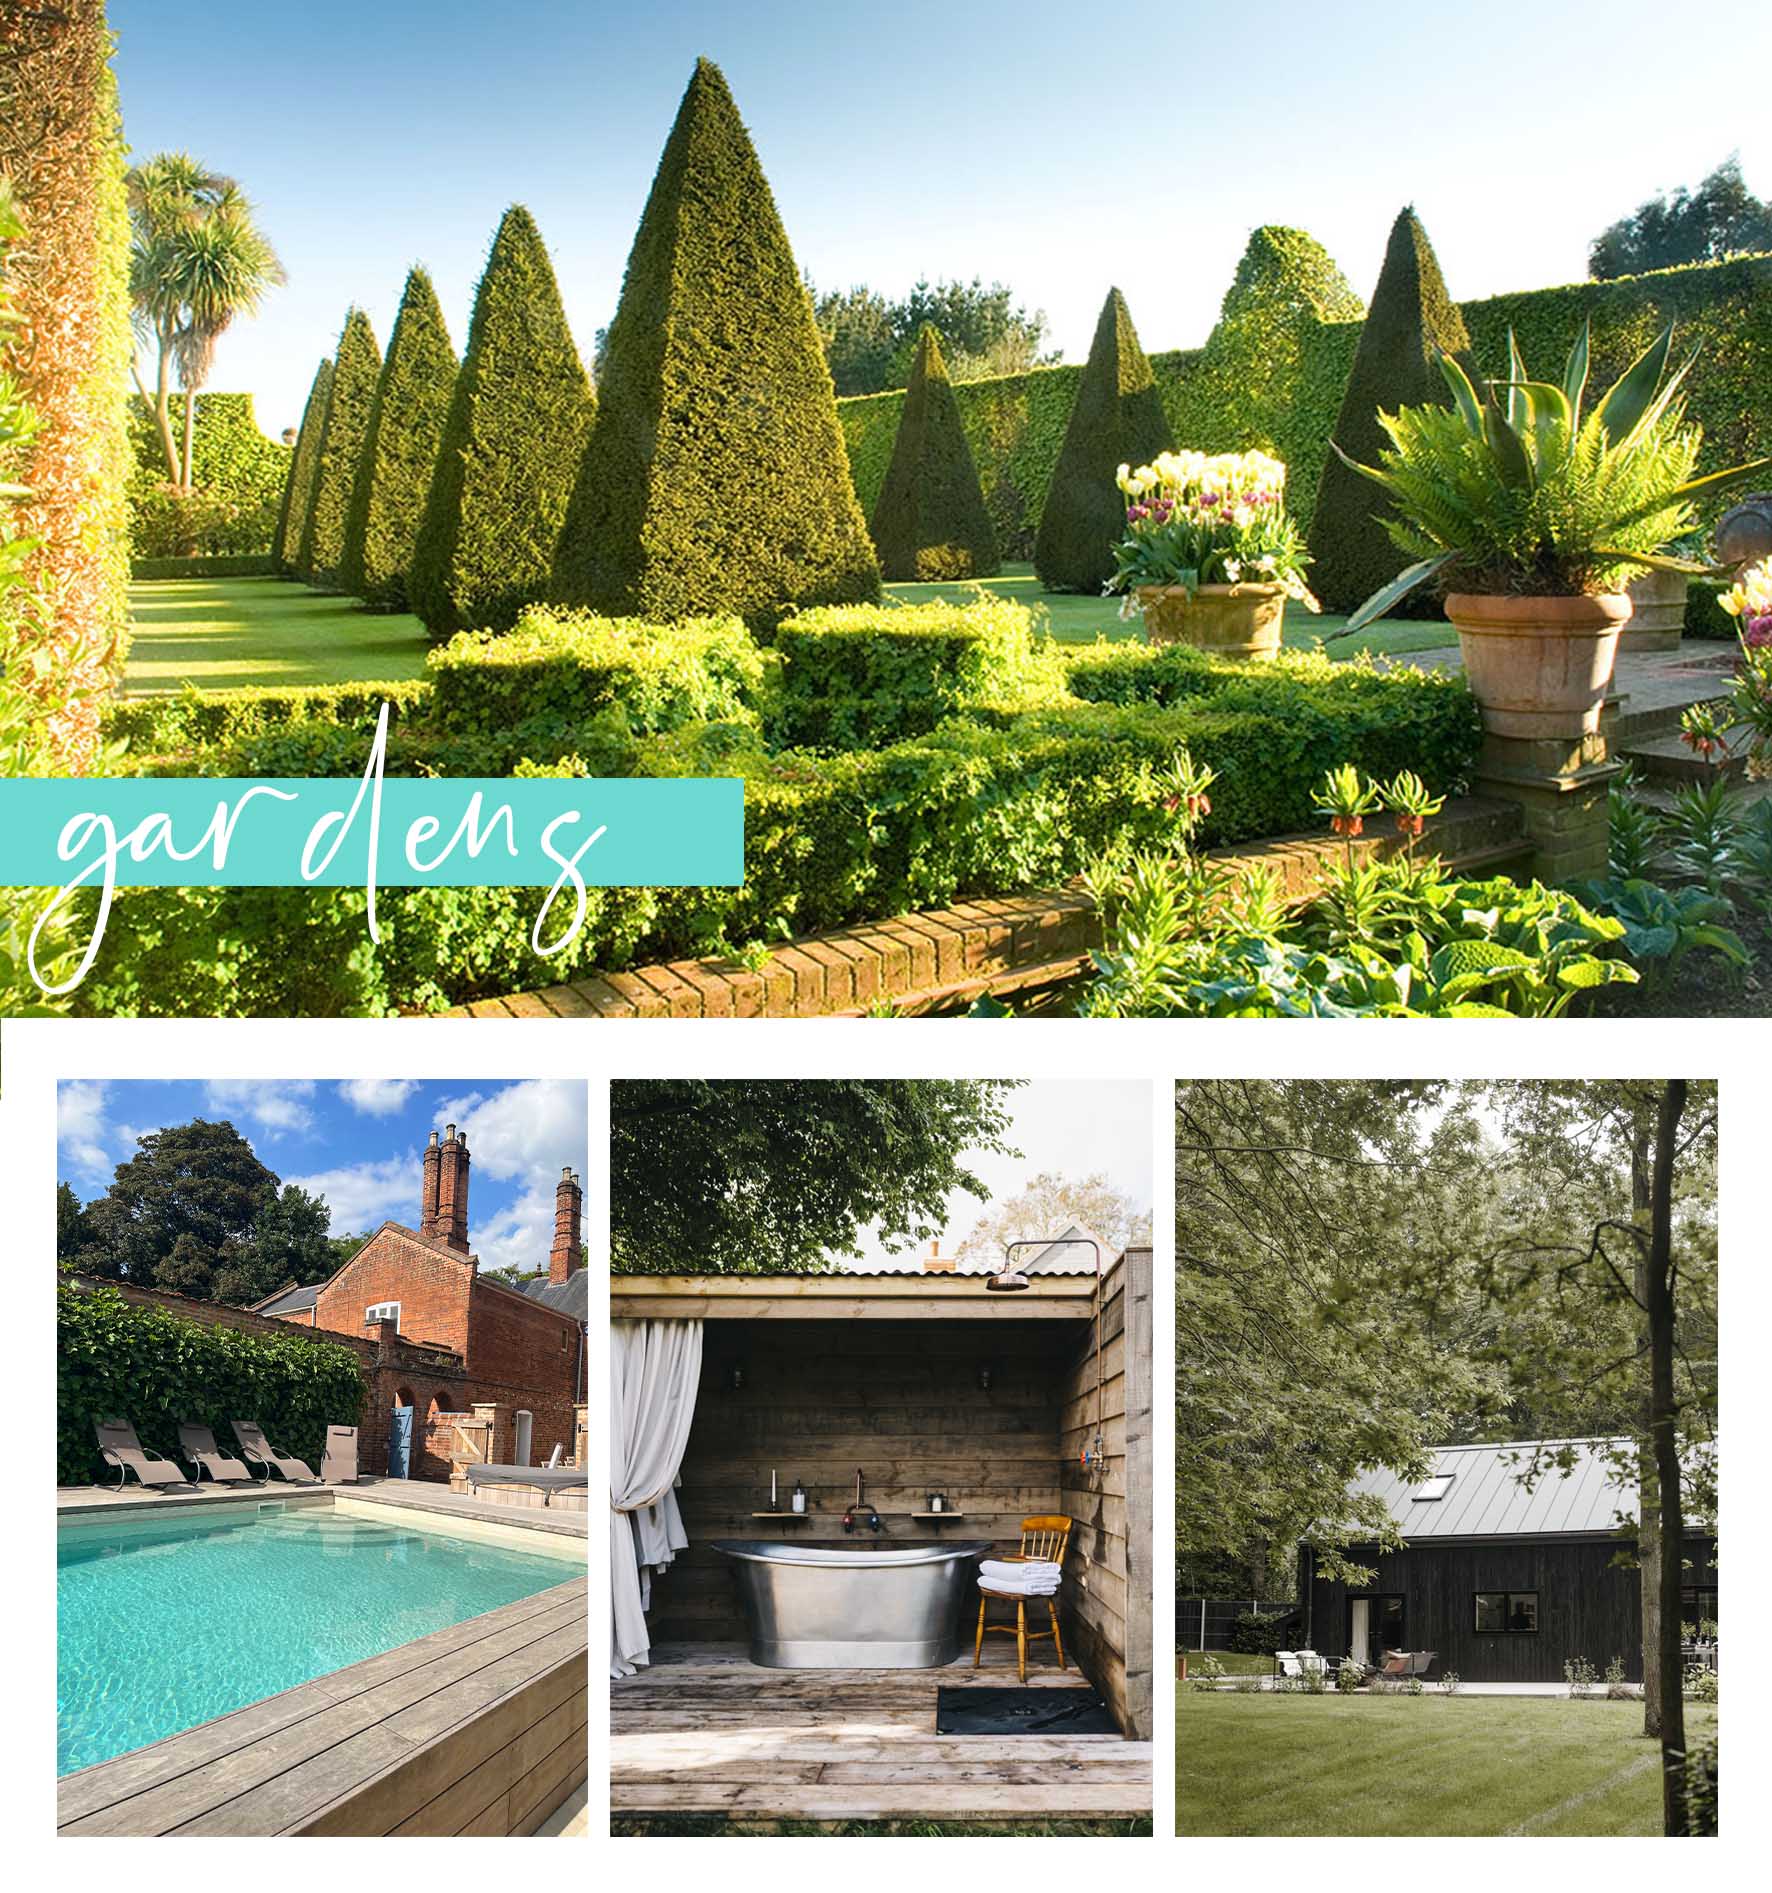 A collage of images of Norfolk gardens, including pools, outdoor baths & woodland.